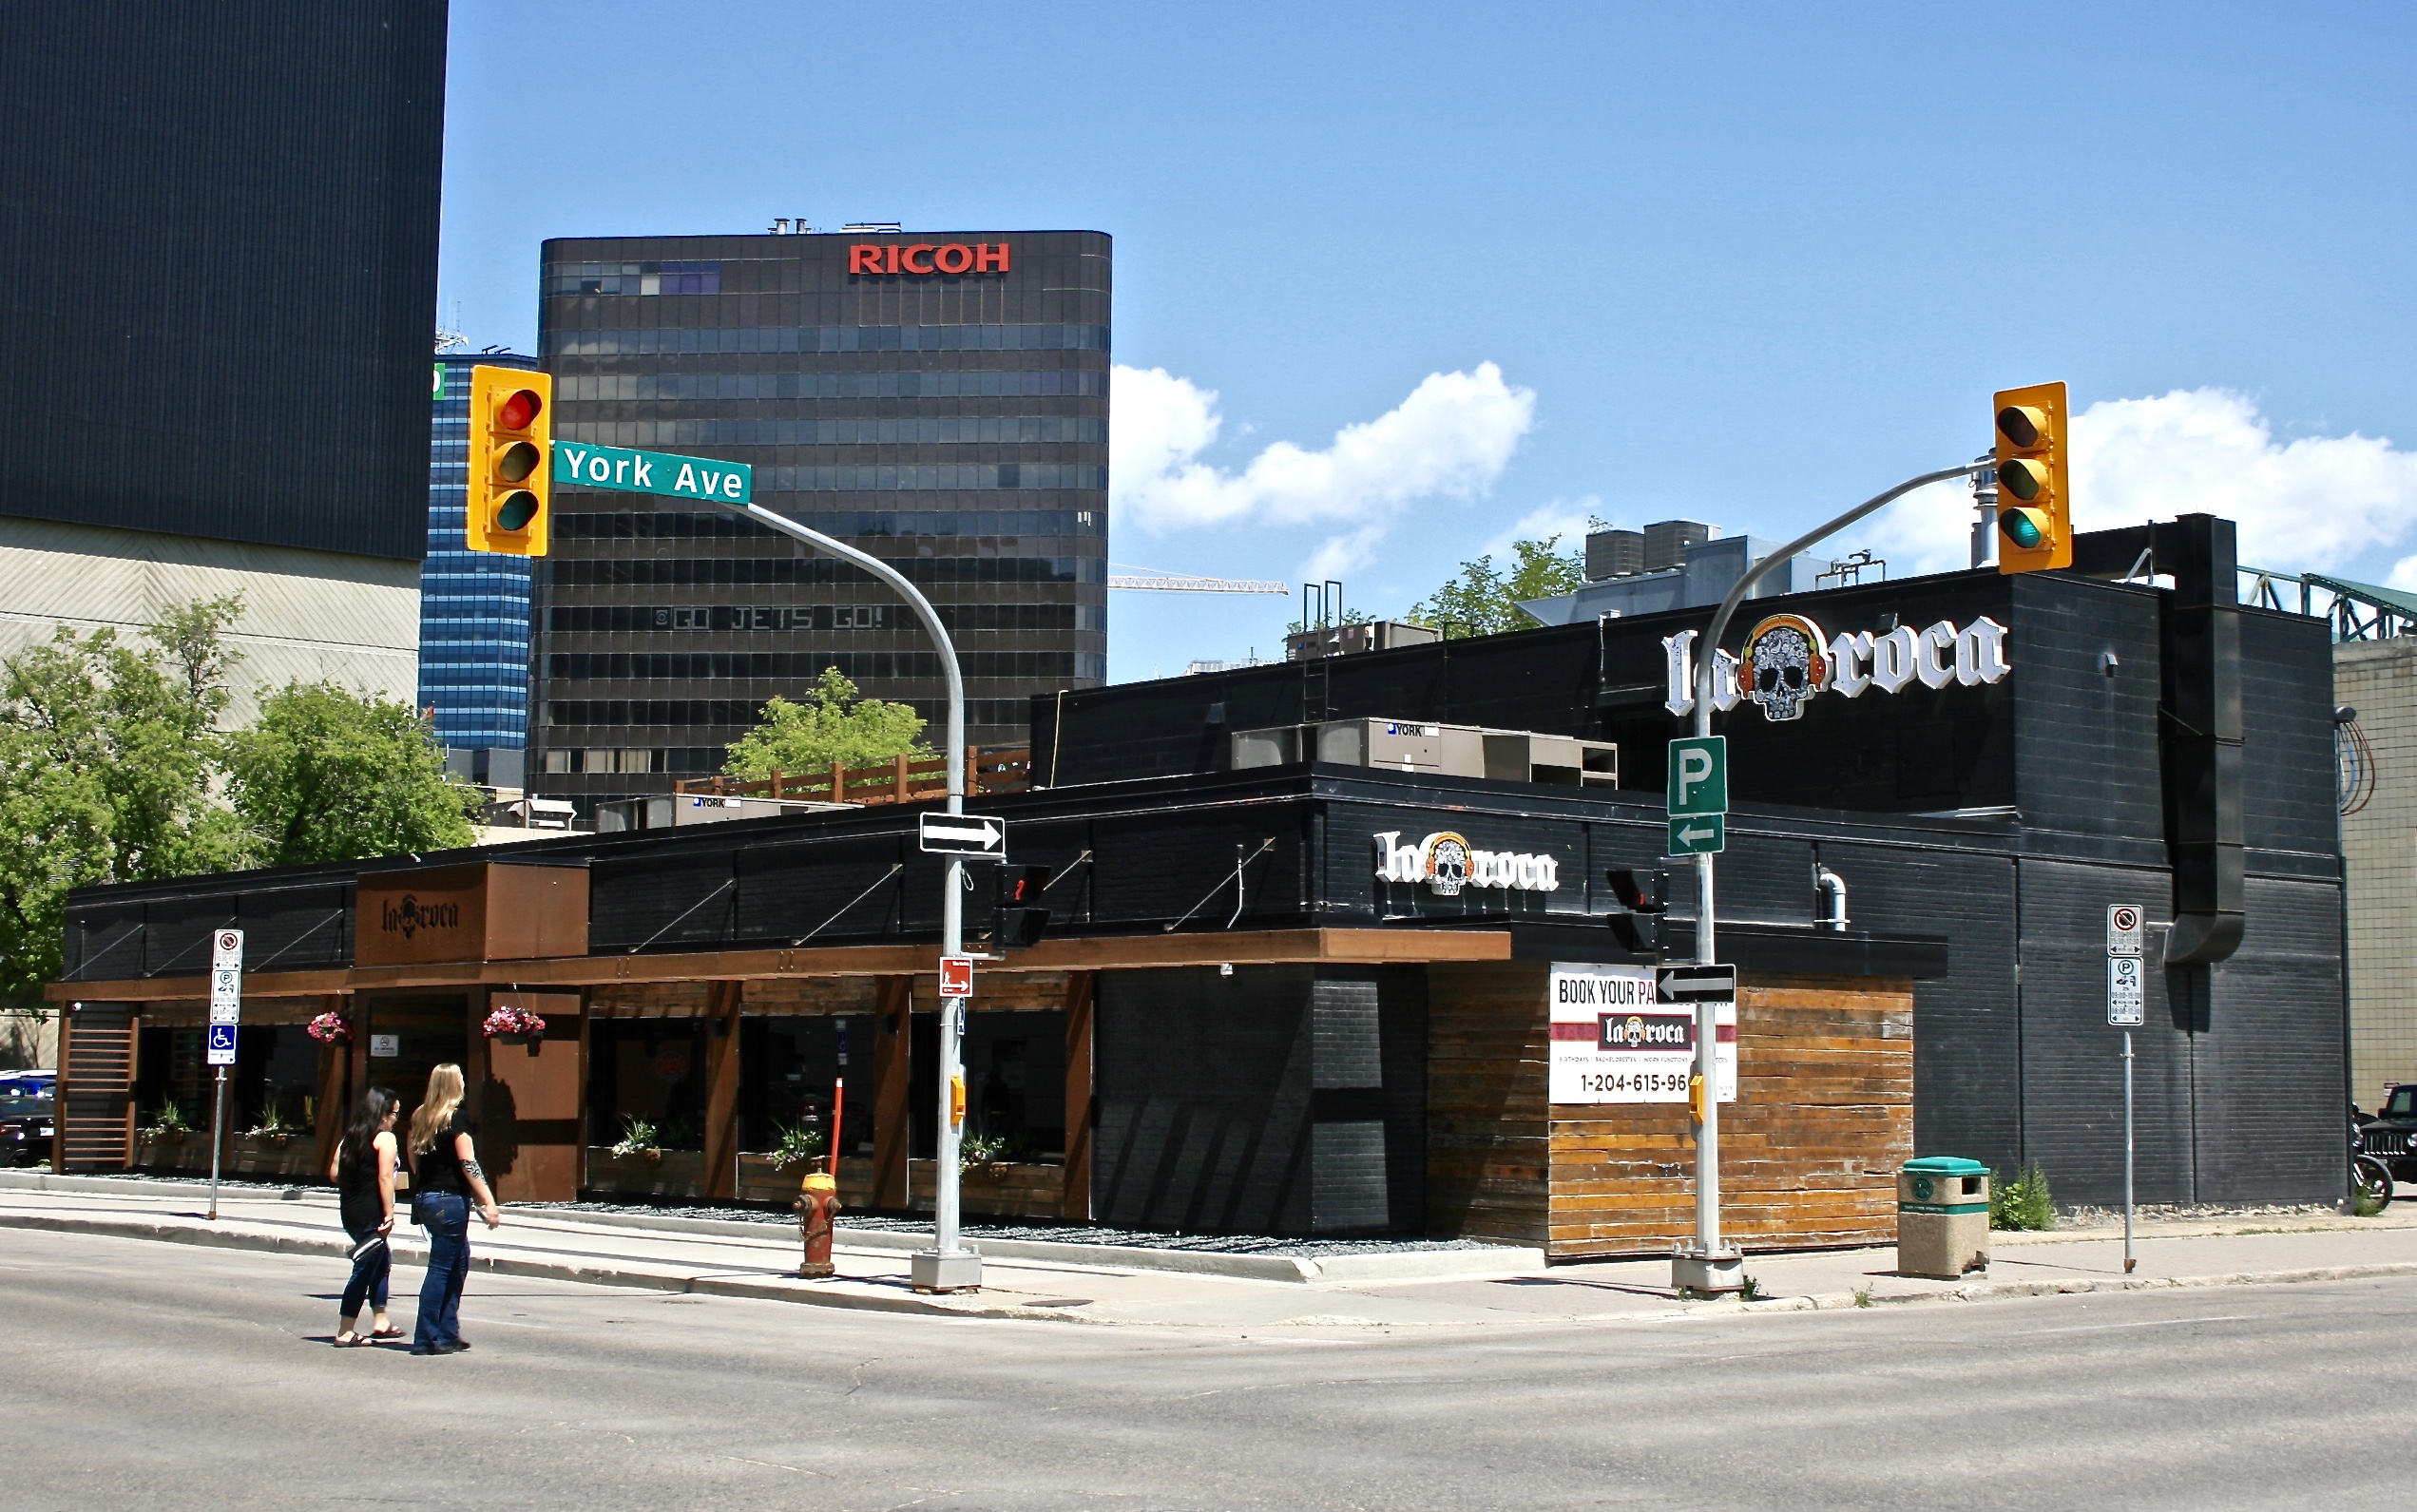 The exterior of the renovated 155 Smith Street. The building is black with wood accents. There is a sign for La Roca with a skull.